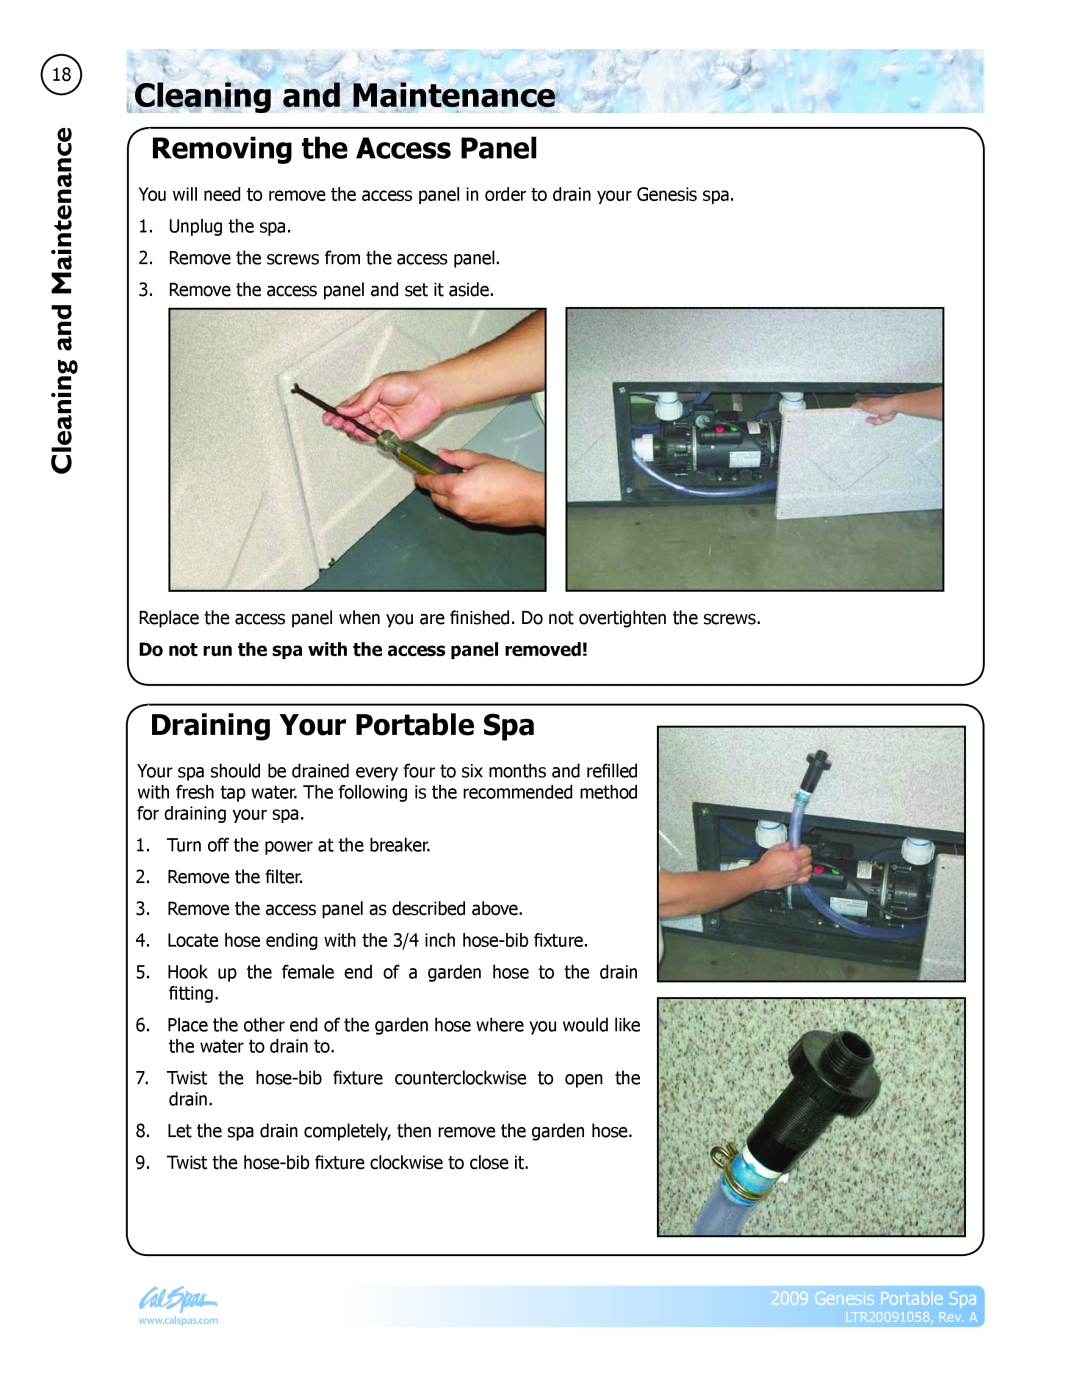 Cal Spas Genesis Portable Spa manual Cleaning and Maintenance, Removing the Access Panel, Draining Your Portable Spa 